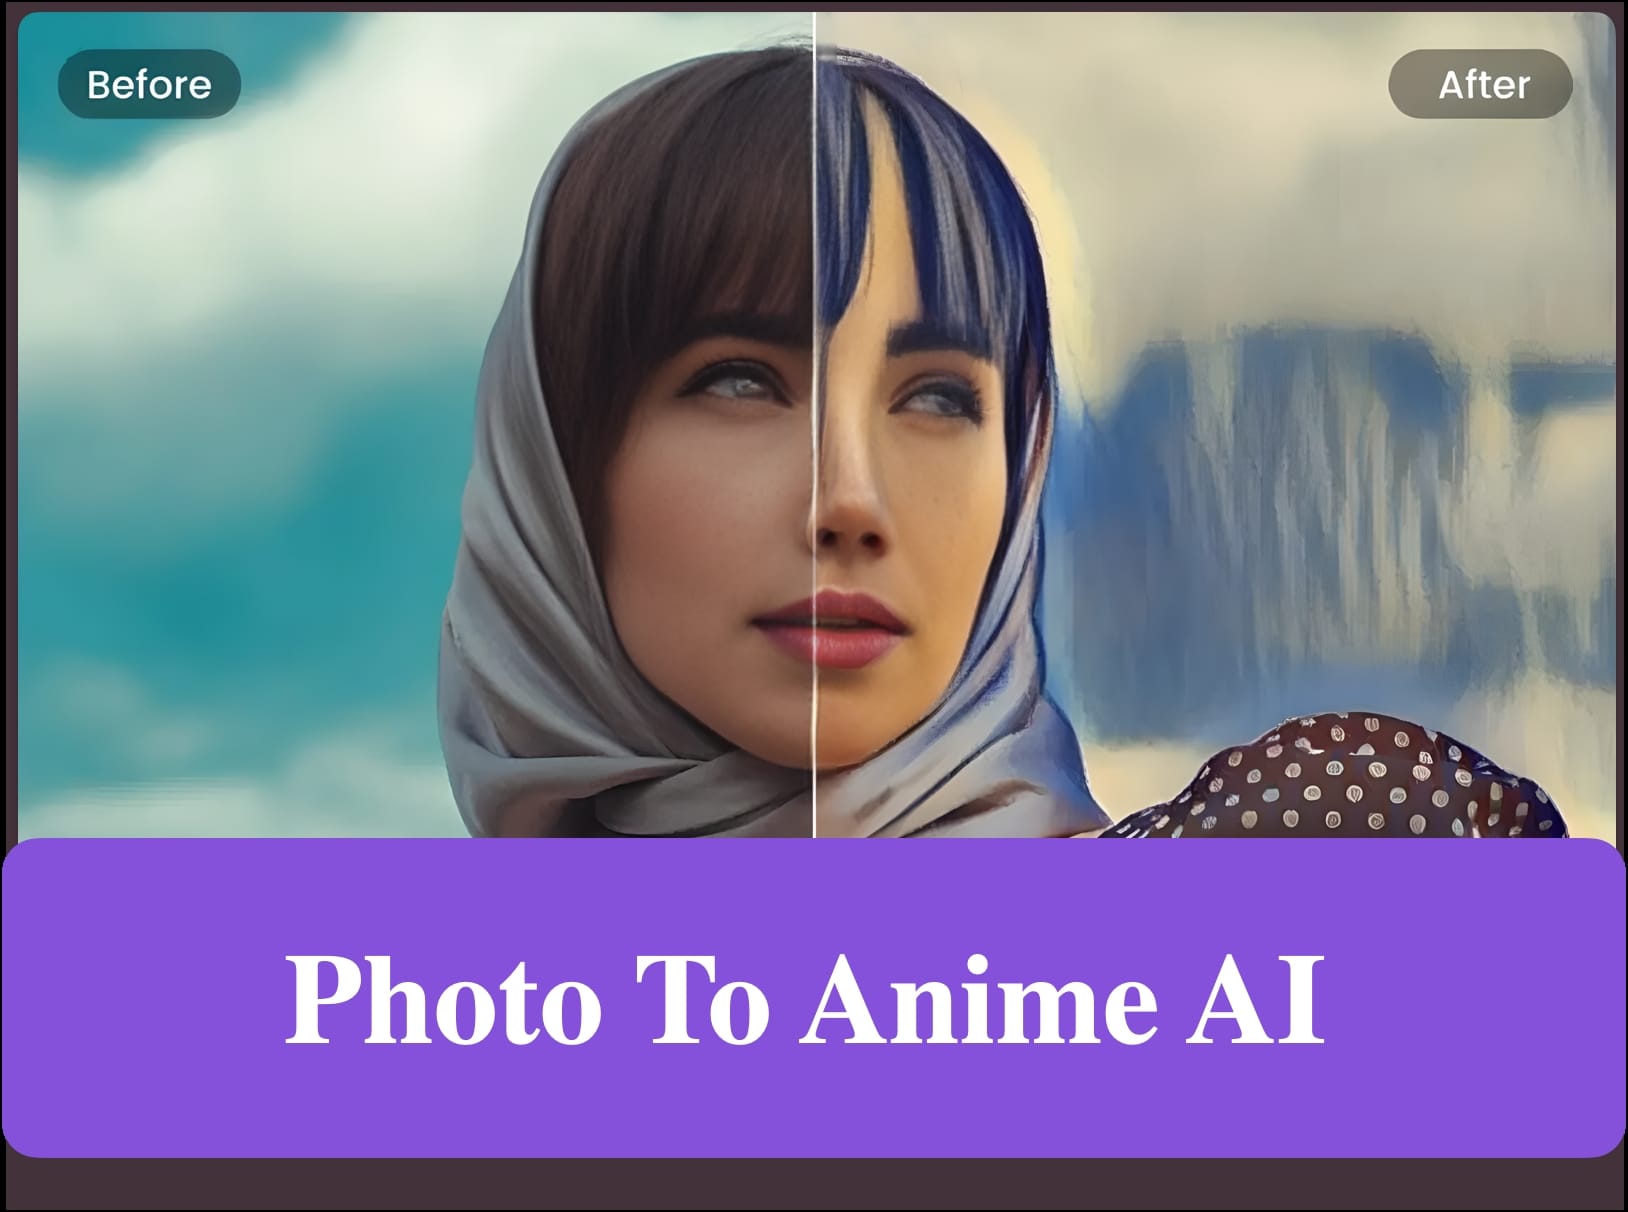 Photo to Anime AI: Transform Your Images with AI Power